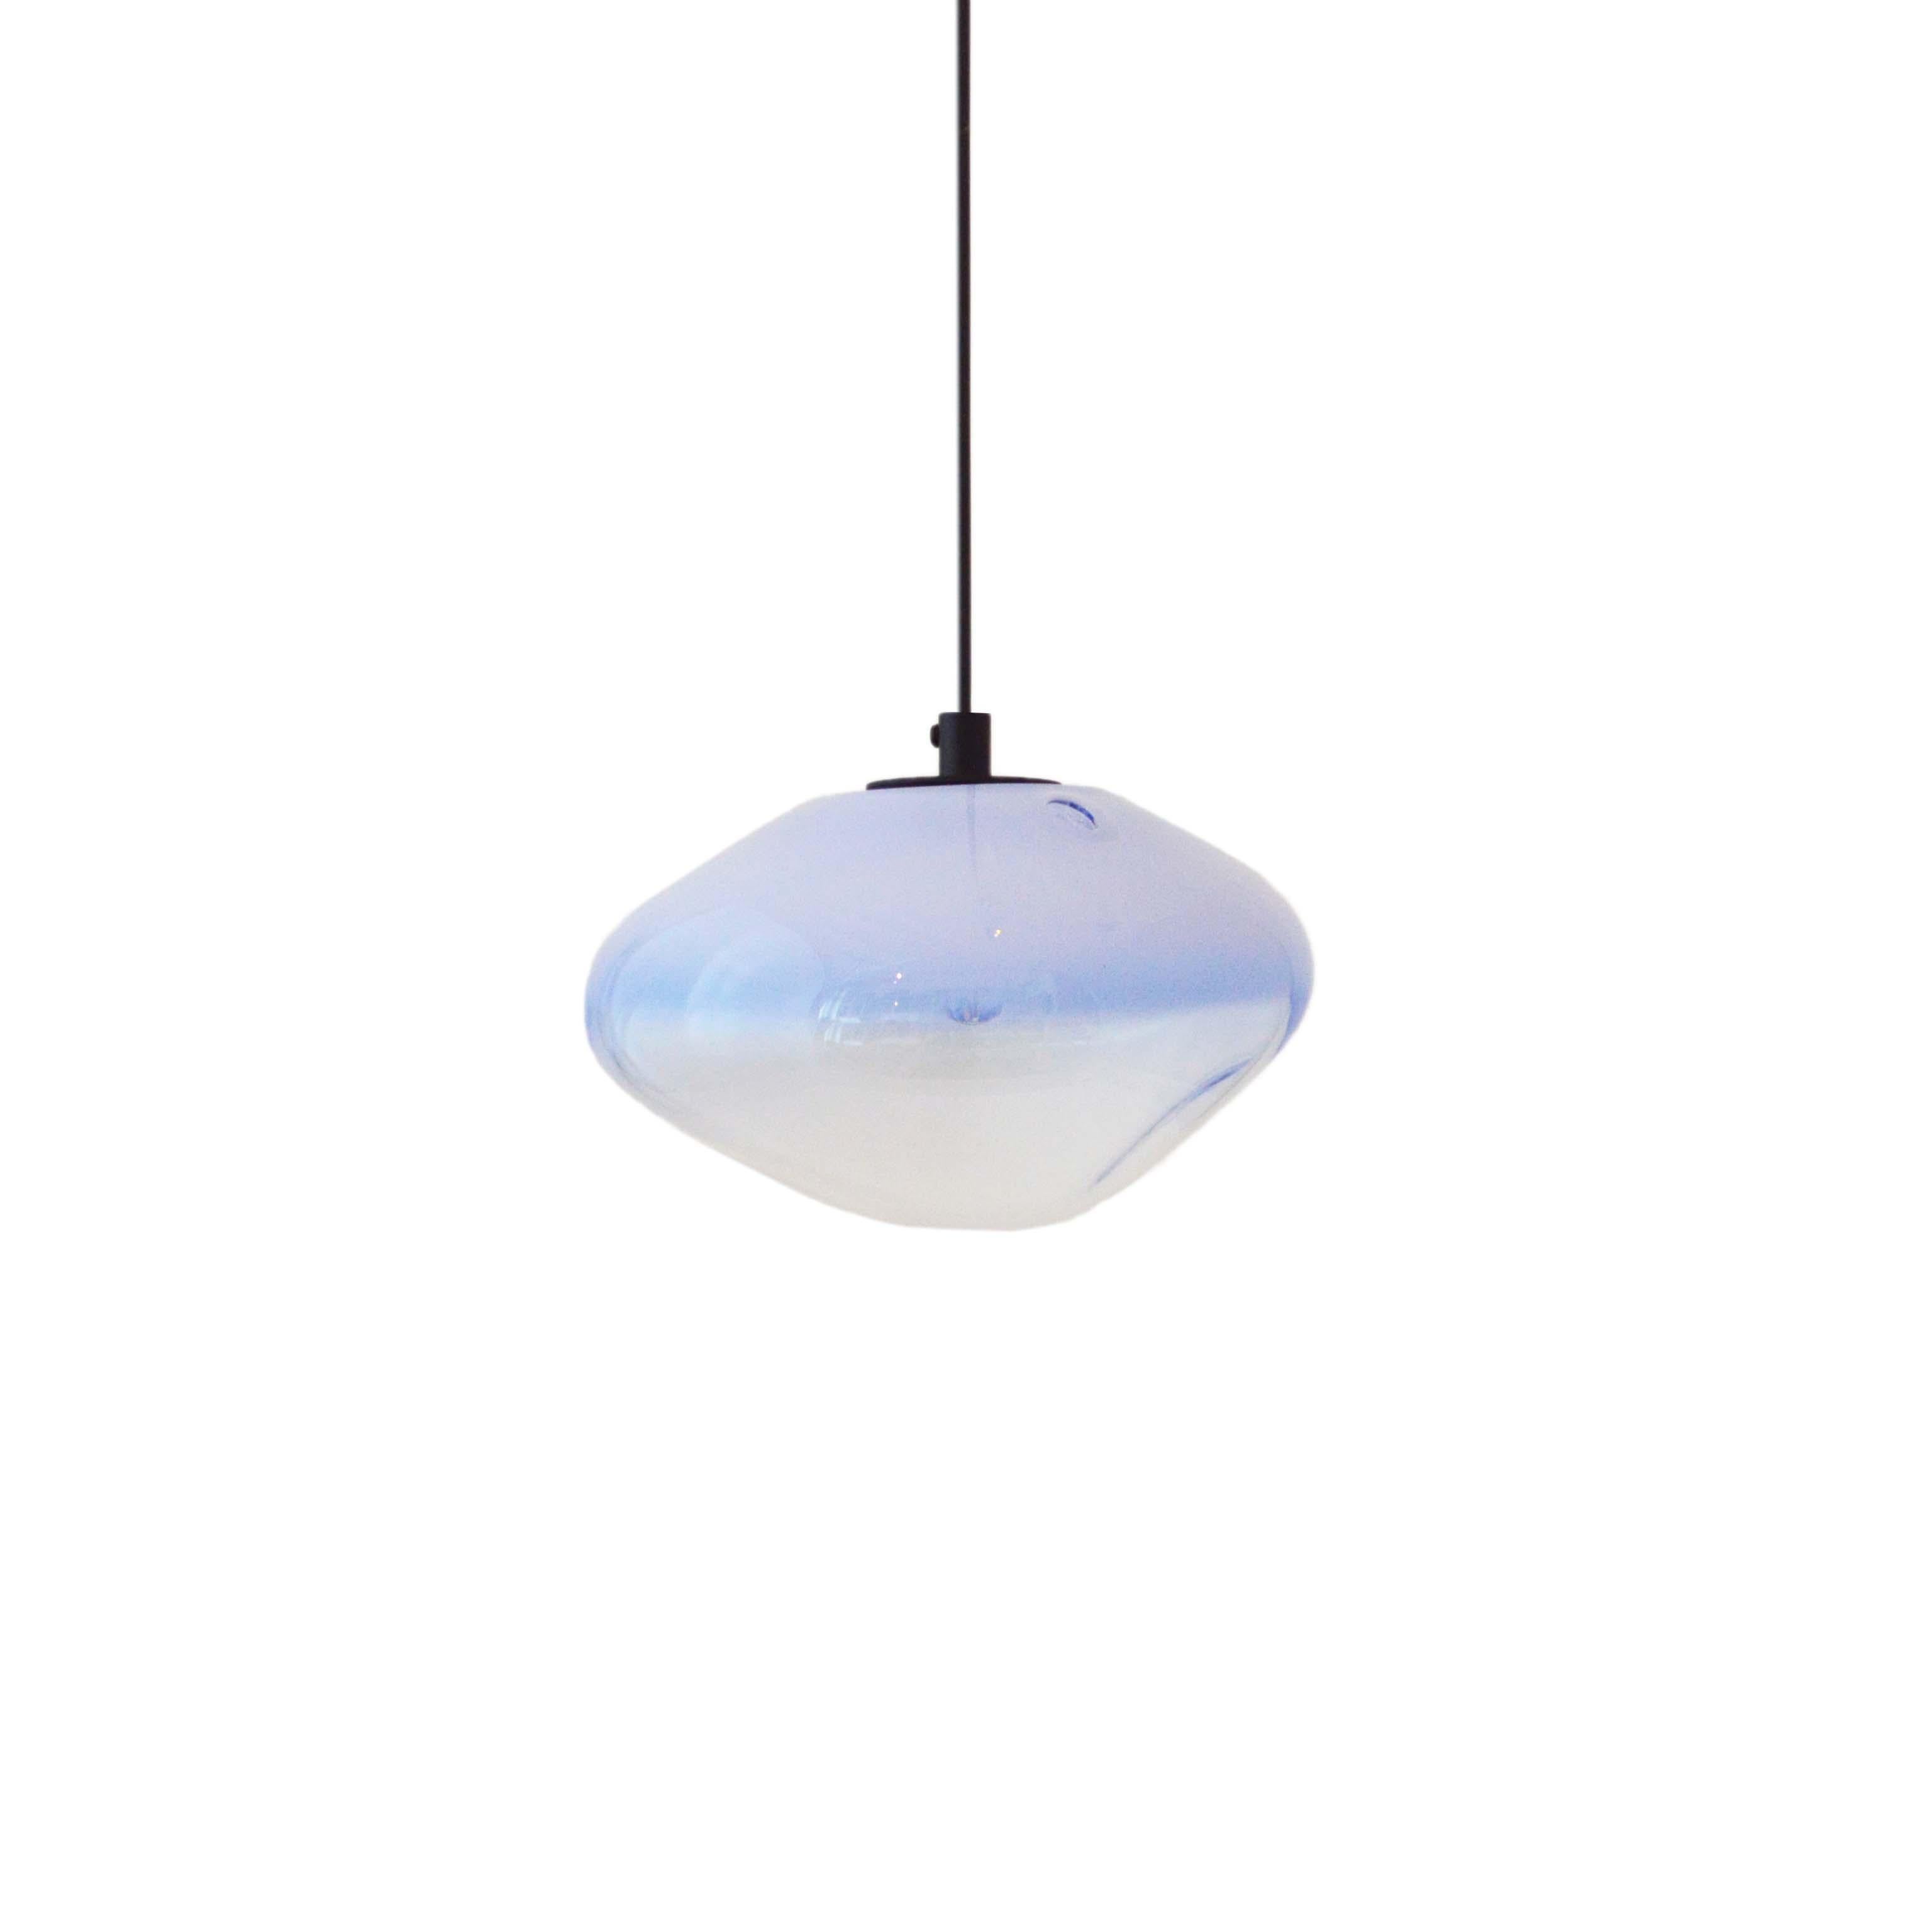 Starglow opaque pendant by ELOA.
No UL listed 
Material: glass, steel, silver.
Dimensions: D 15 x W 13 x H 100 cm.
Also available in different colours and dimensions.

All our lamps can be wired according to each country. If sold to the USA it will